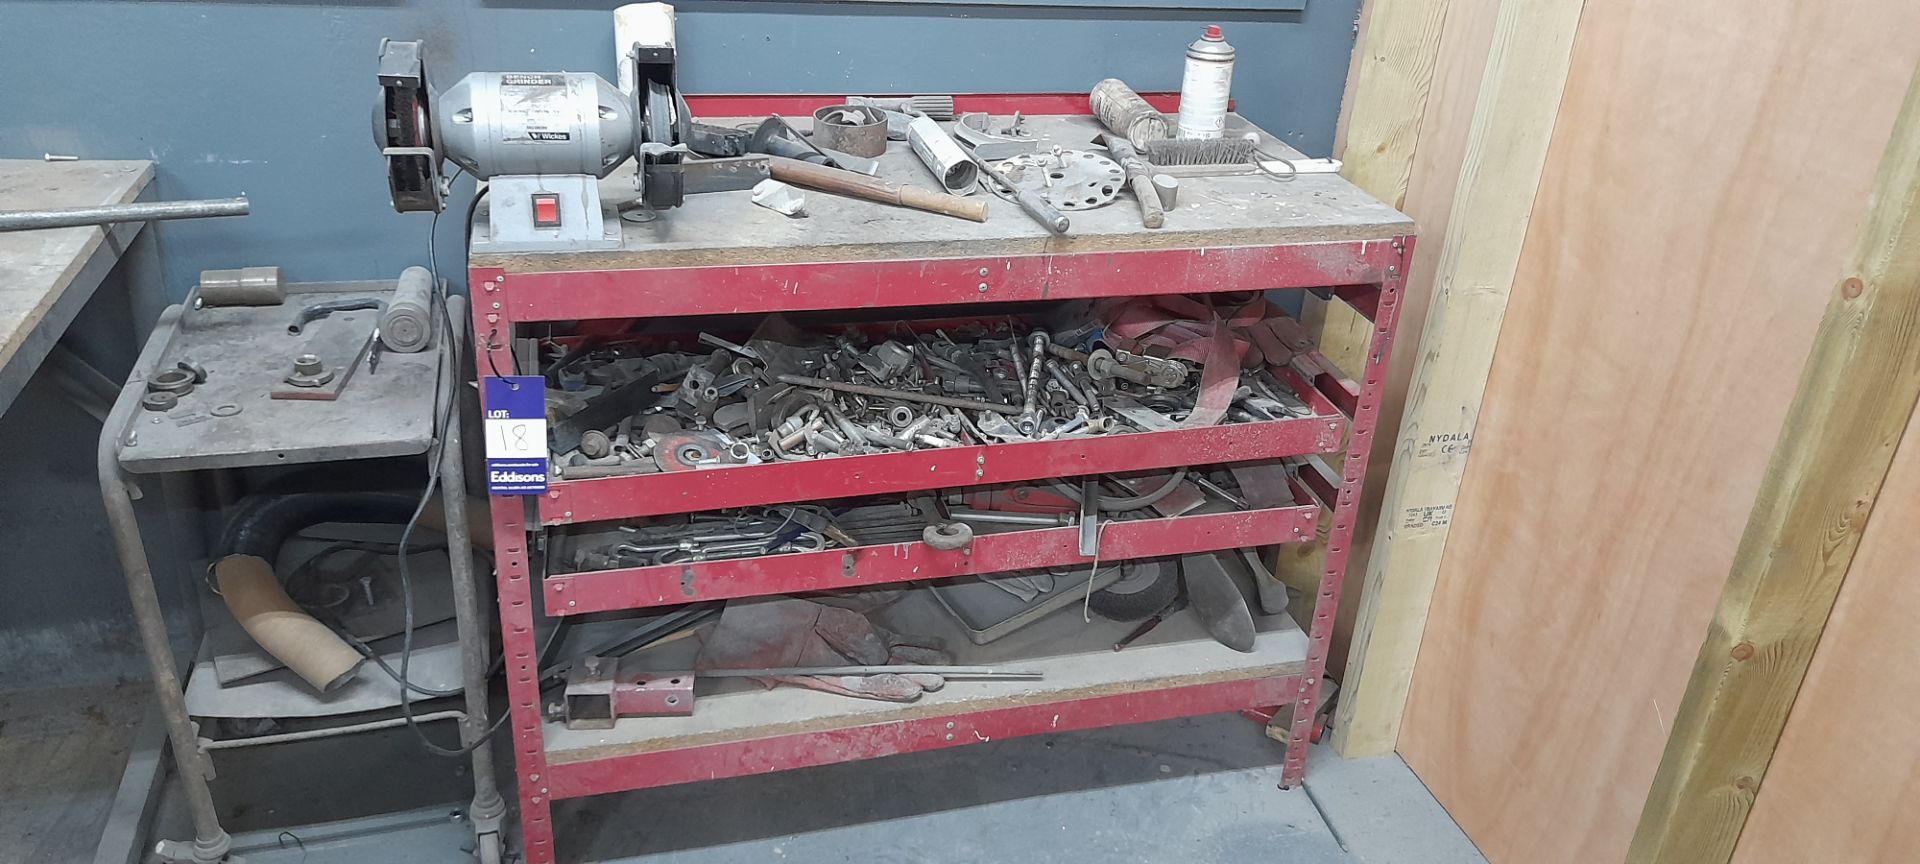 Dexion Rack Fitted Wicks Bench Grinder & Contents of Various Engineering Consumables